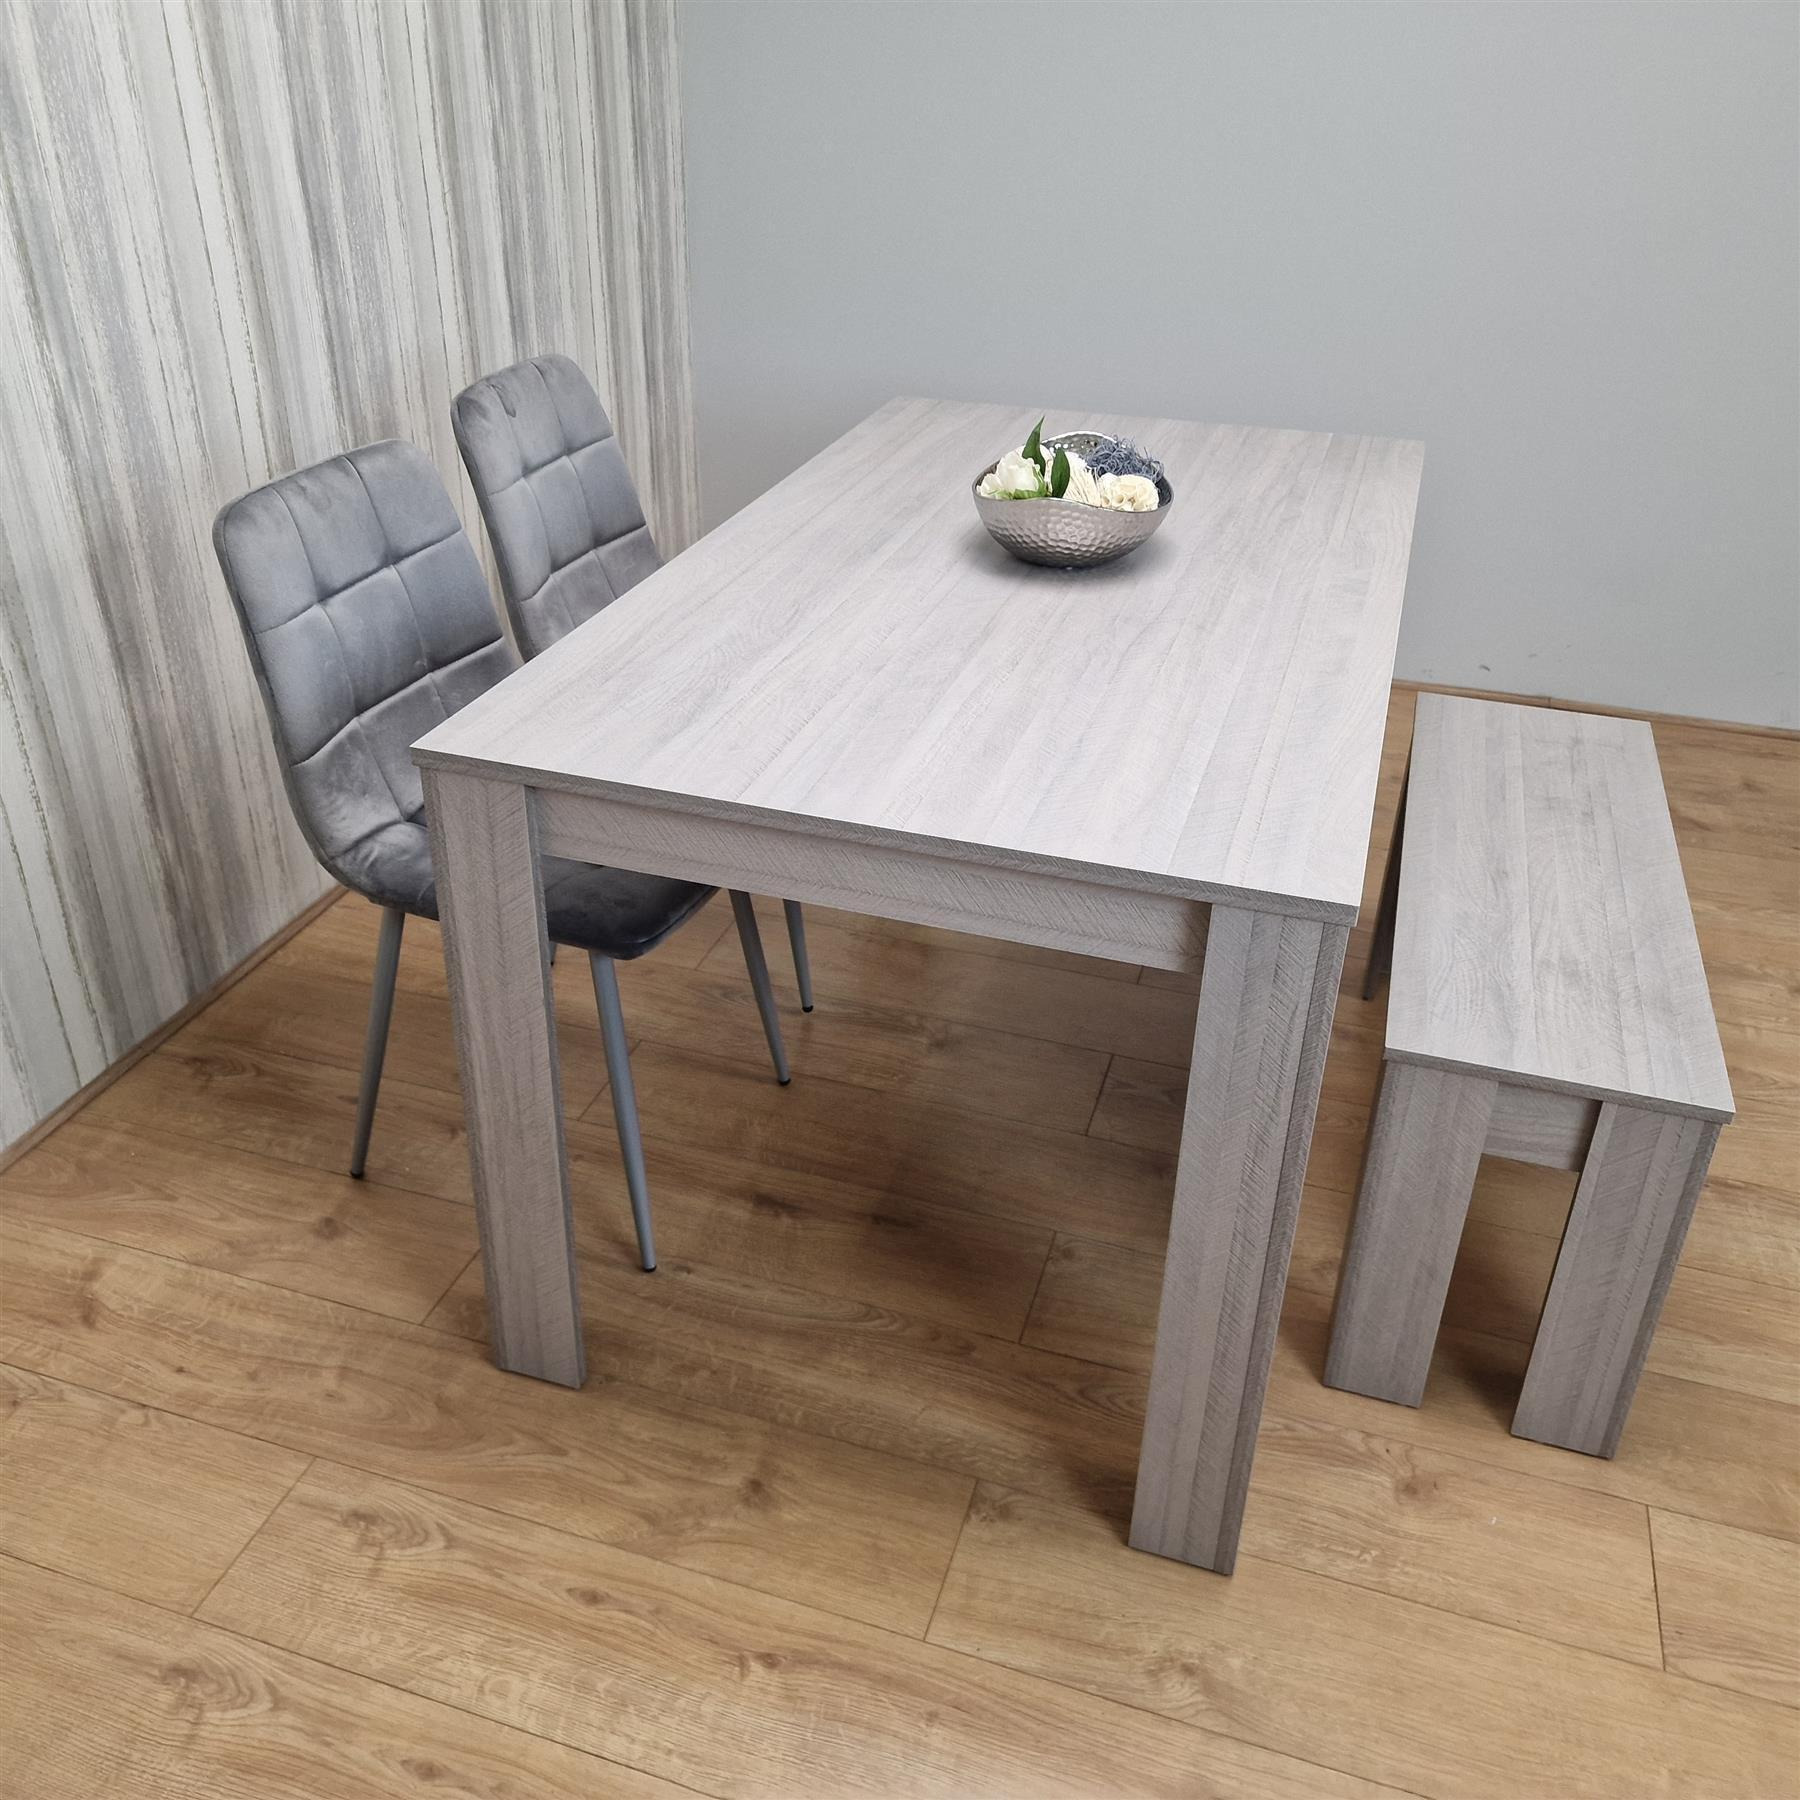 Dining Table Set with 2 Chairs Dining Room and Kitchen table set of 2,and Bench - image 1